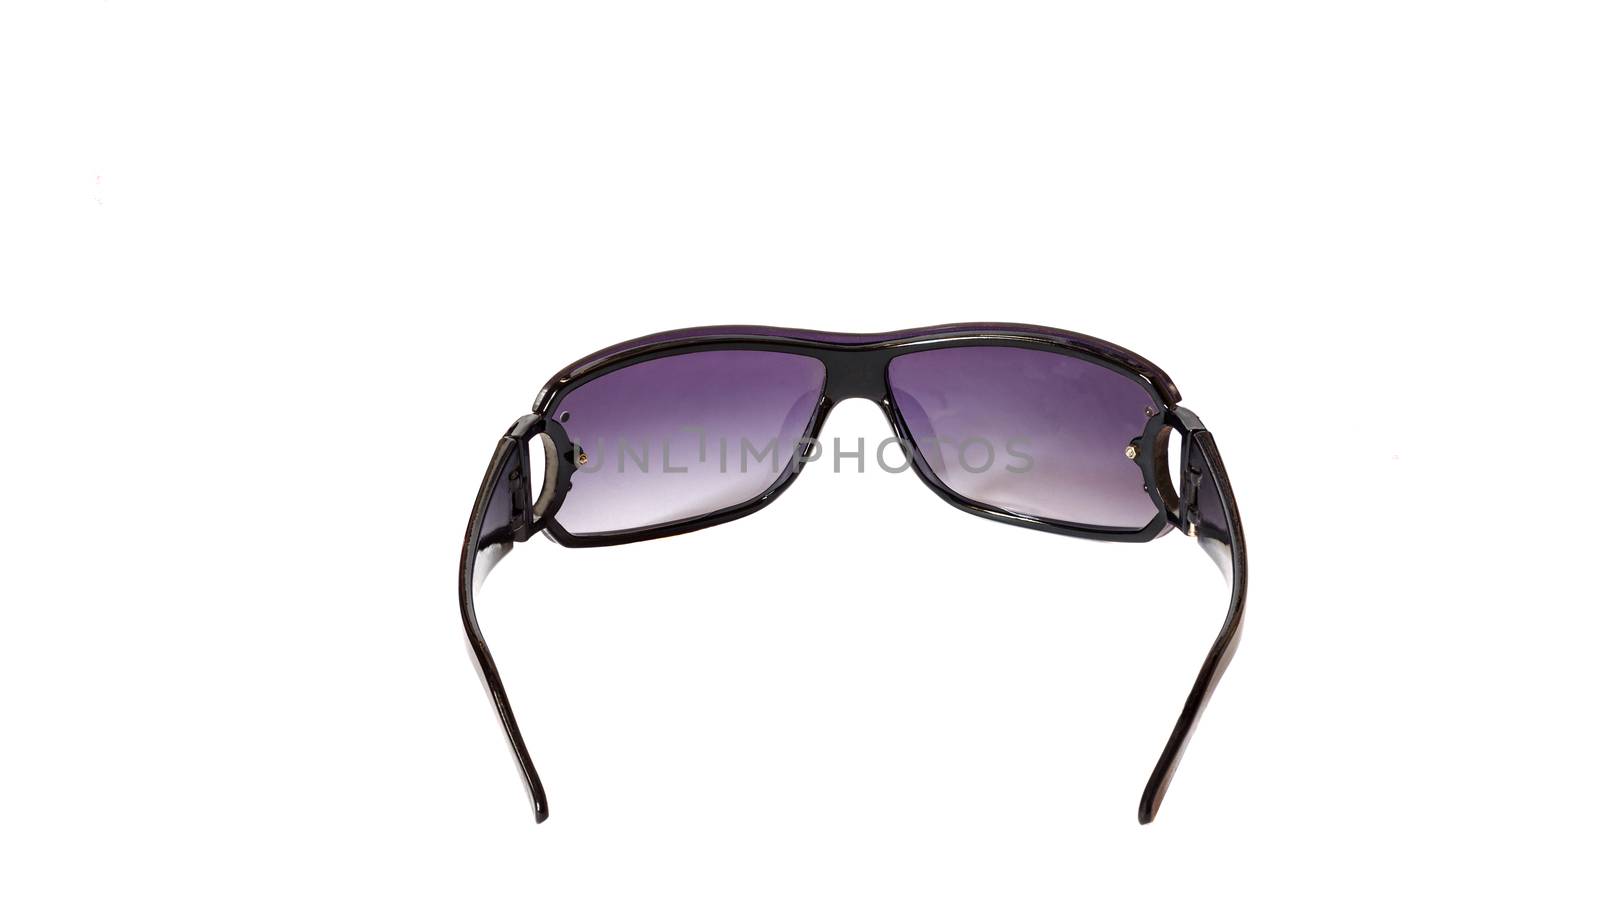 Sun Glasses Purple Toned Isolated On White Background